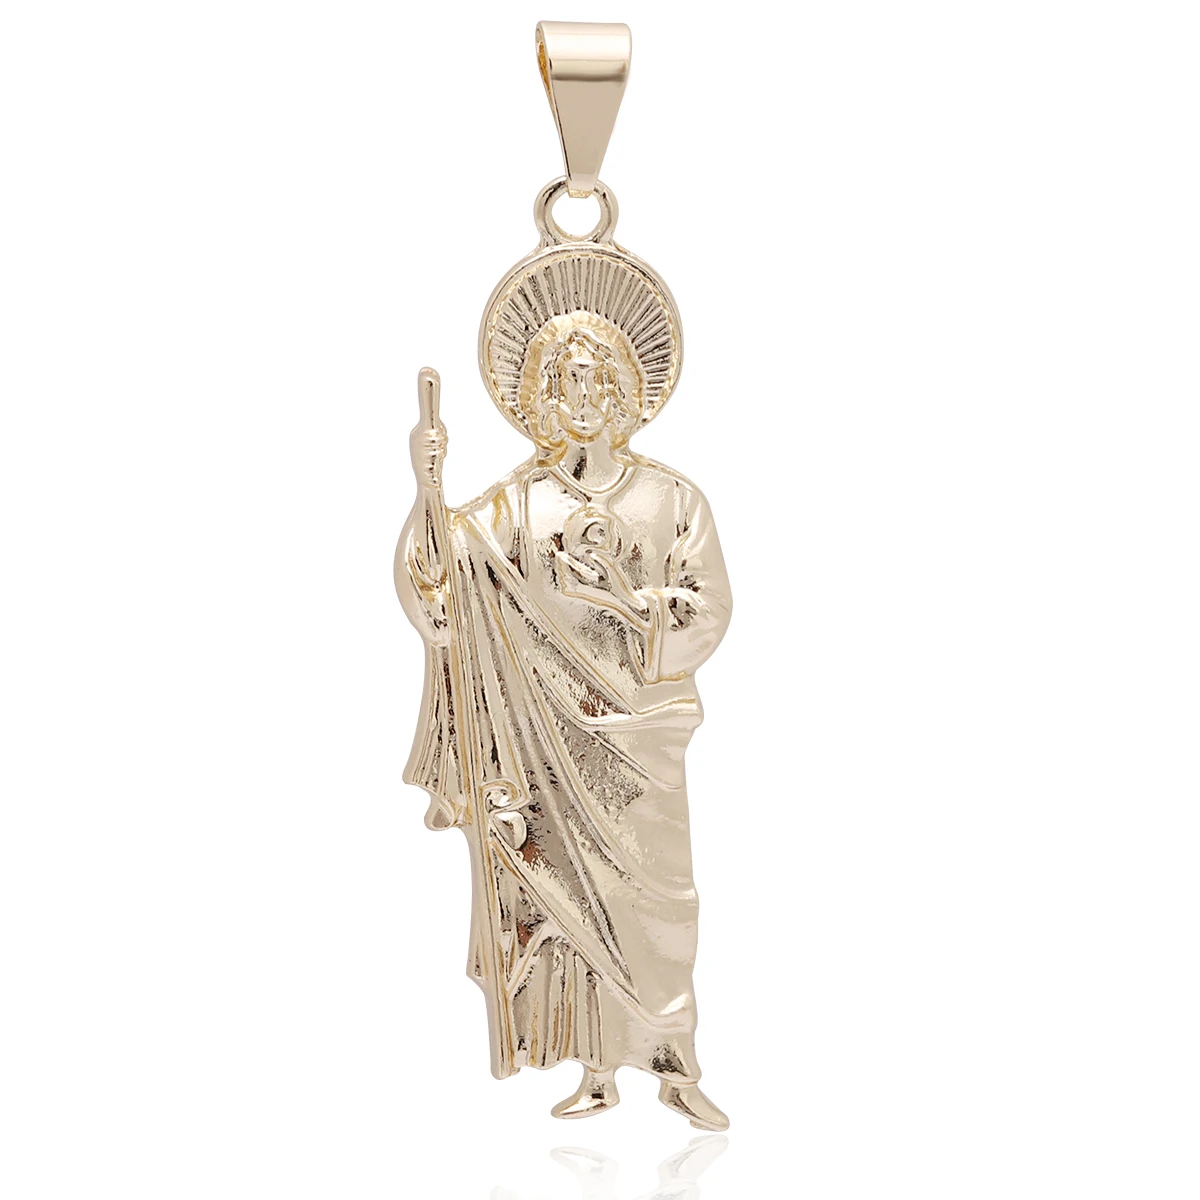 

14k gold san benito necklace Religious pendant newly designed charm ornament for the Catholic virgin Mary